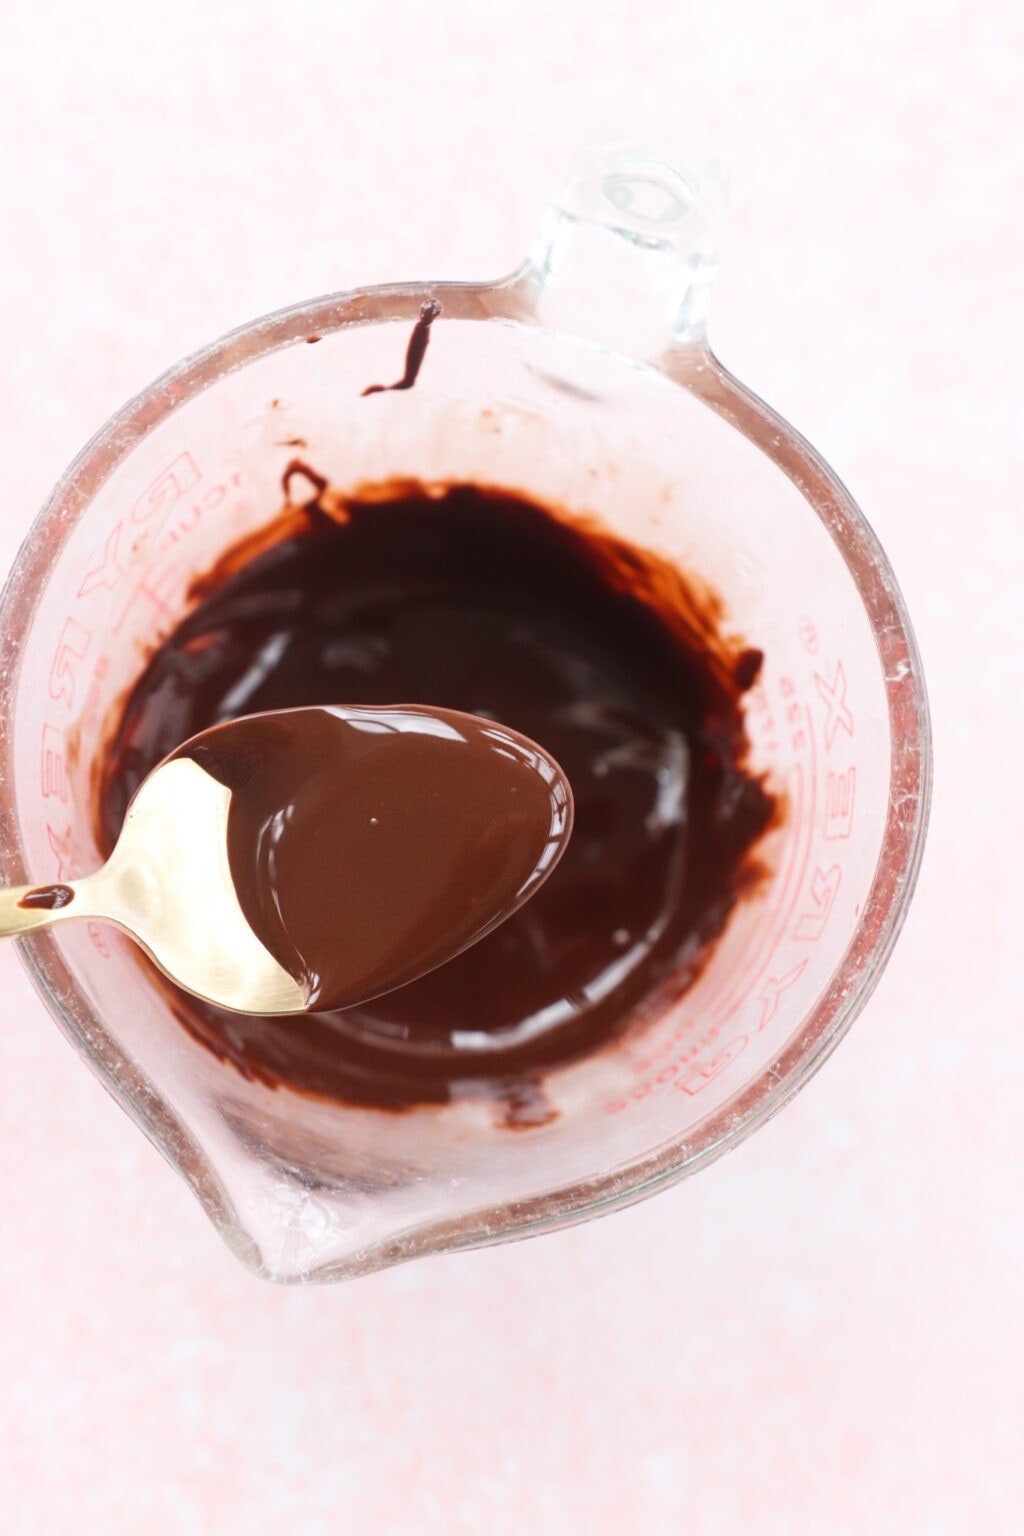 Ingredients for Peanut Butter & Greek Yogurt Cups with Magic Chocolate Shell mixed in a glass measuring cup on a pink marble counter, including chocolate and coconut oil